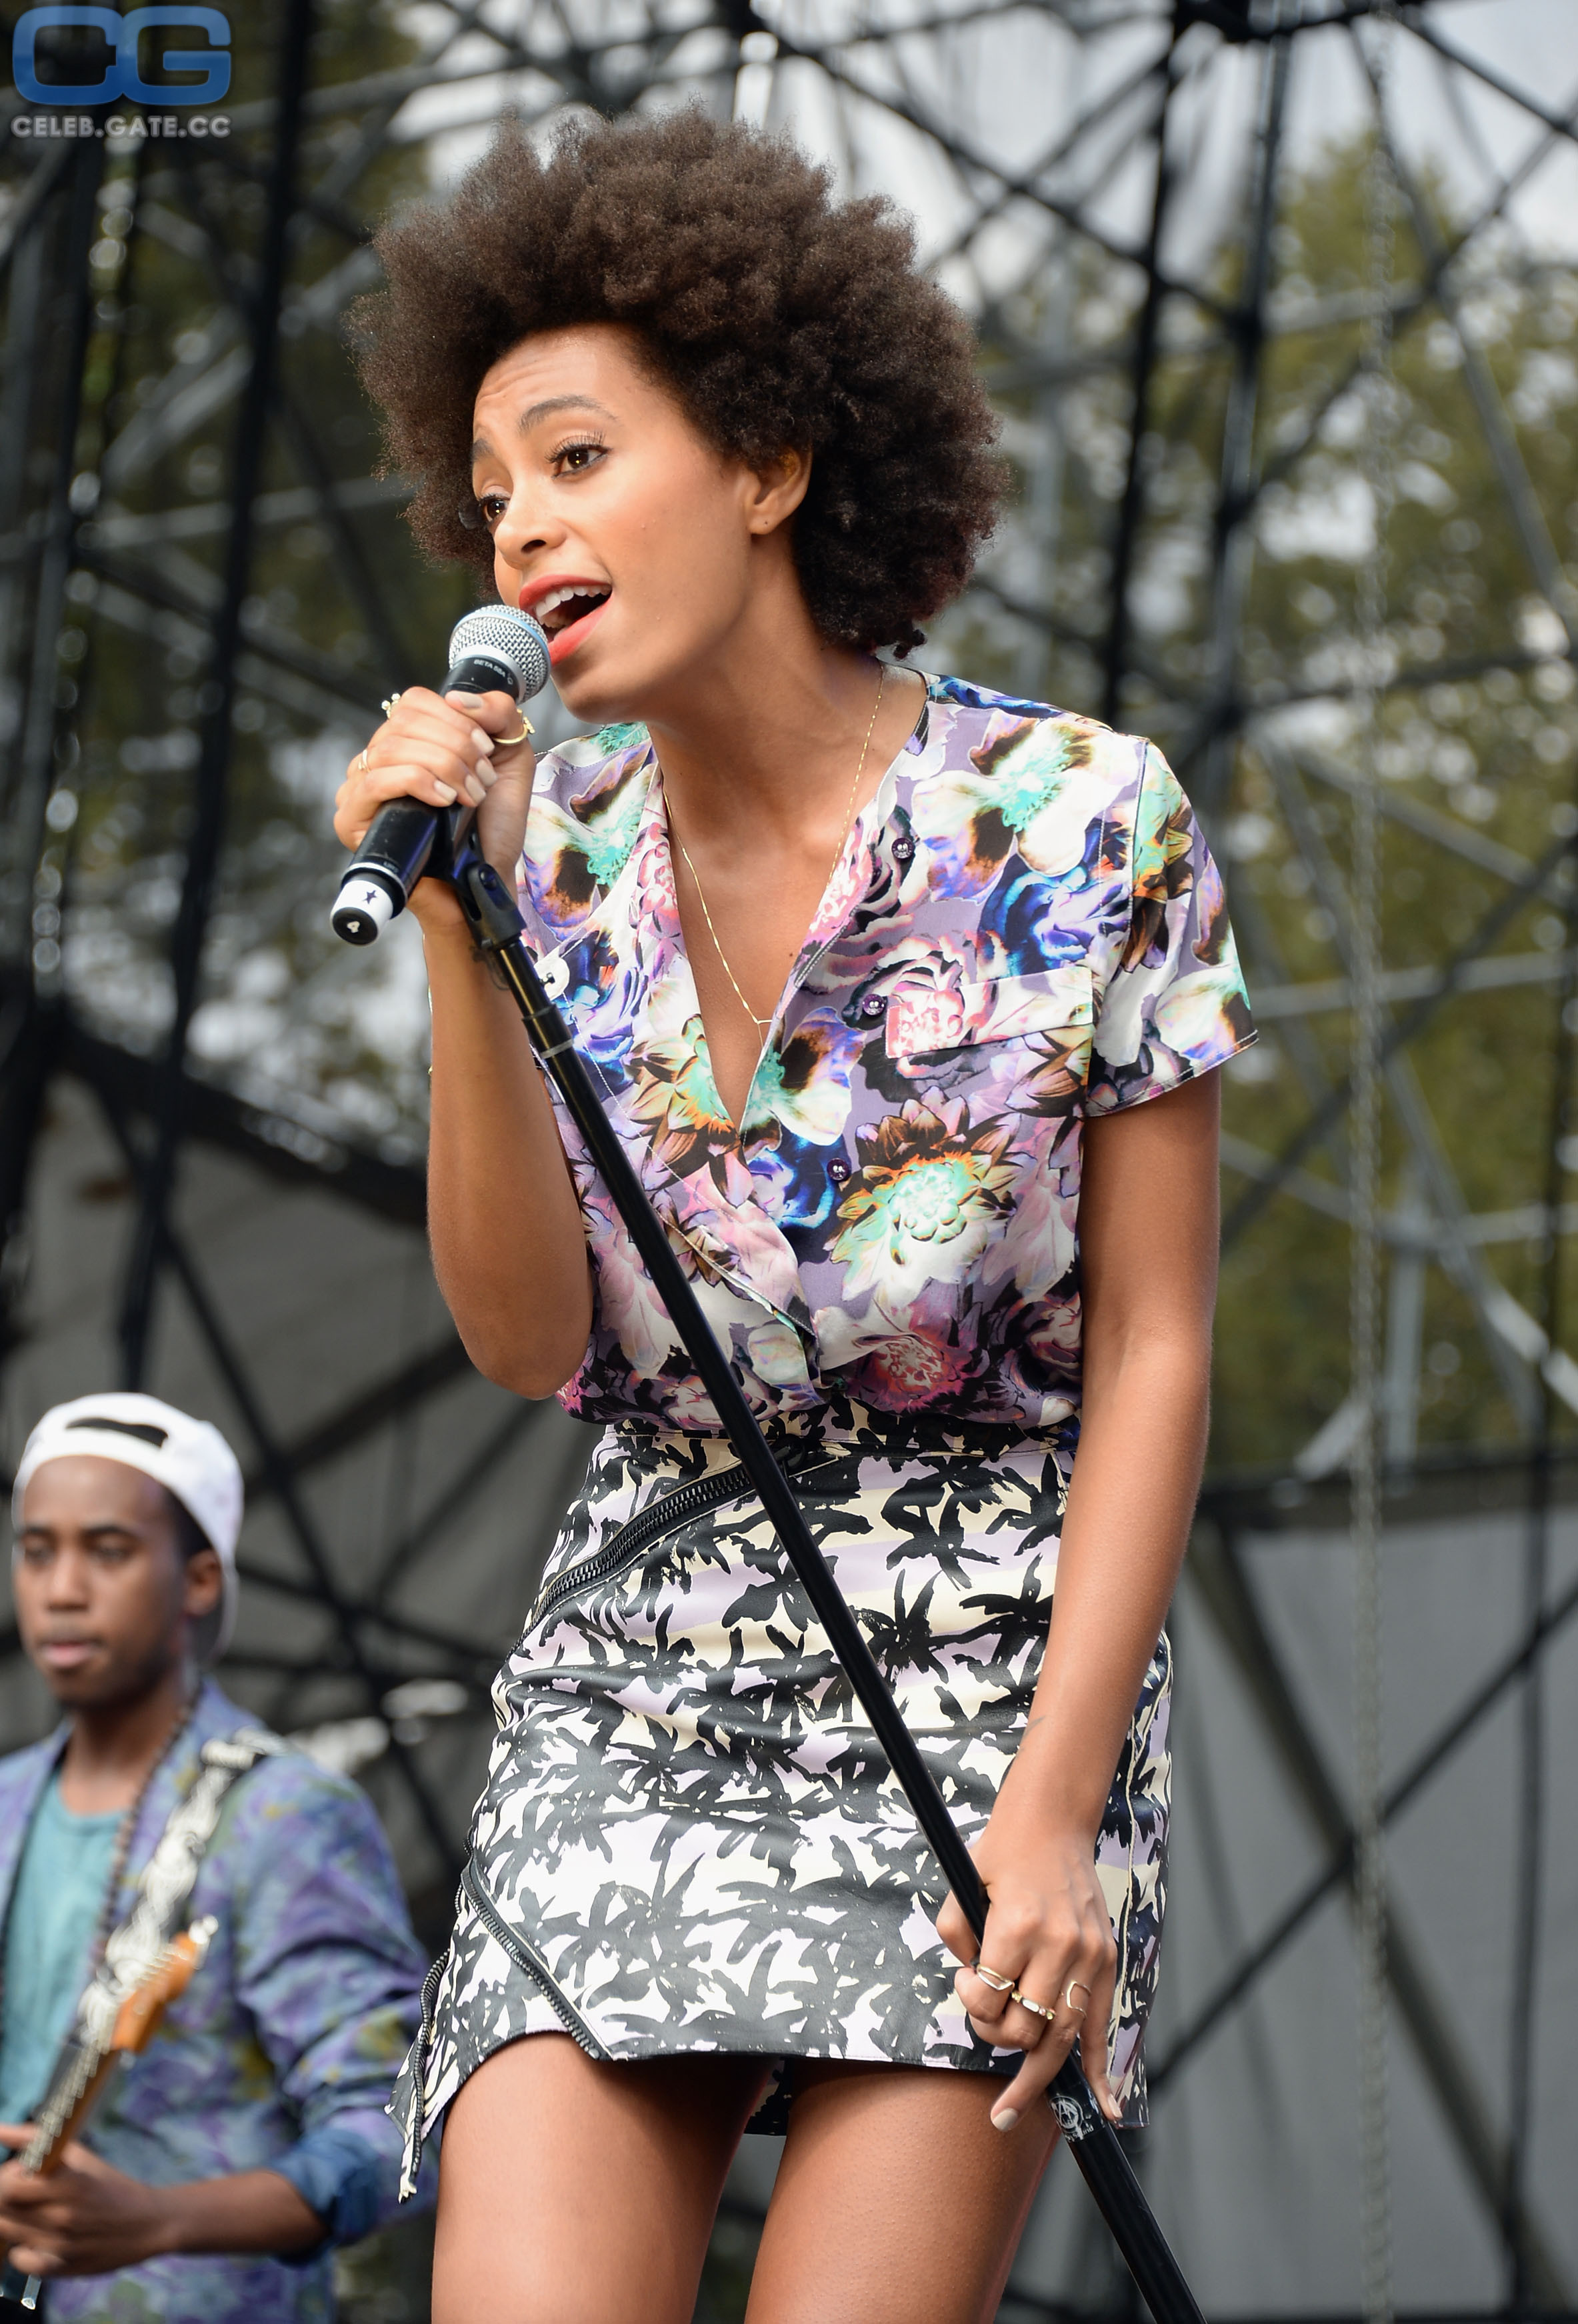 Solange Knowles upskirt